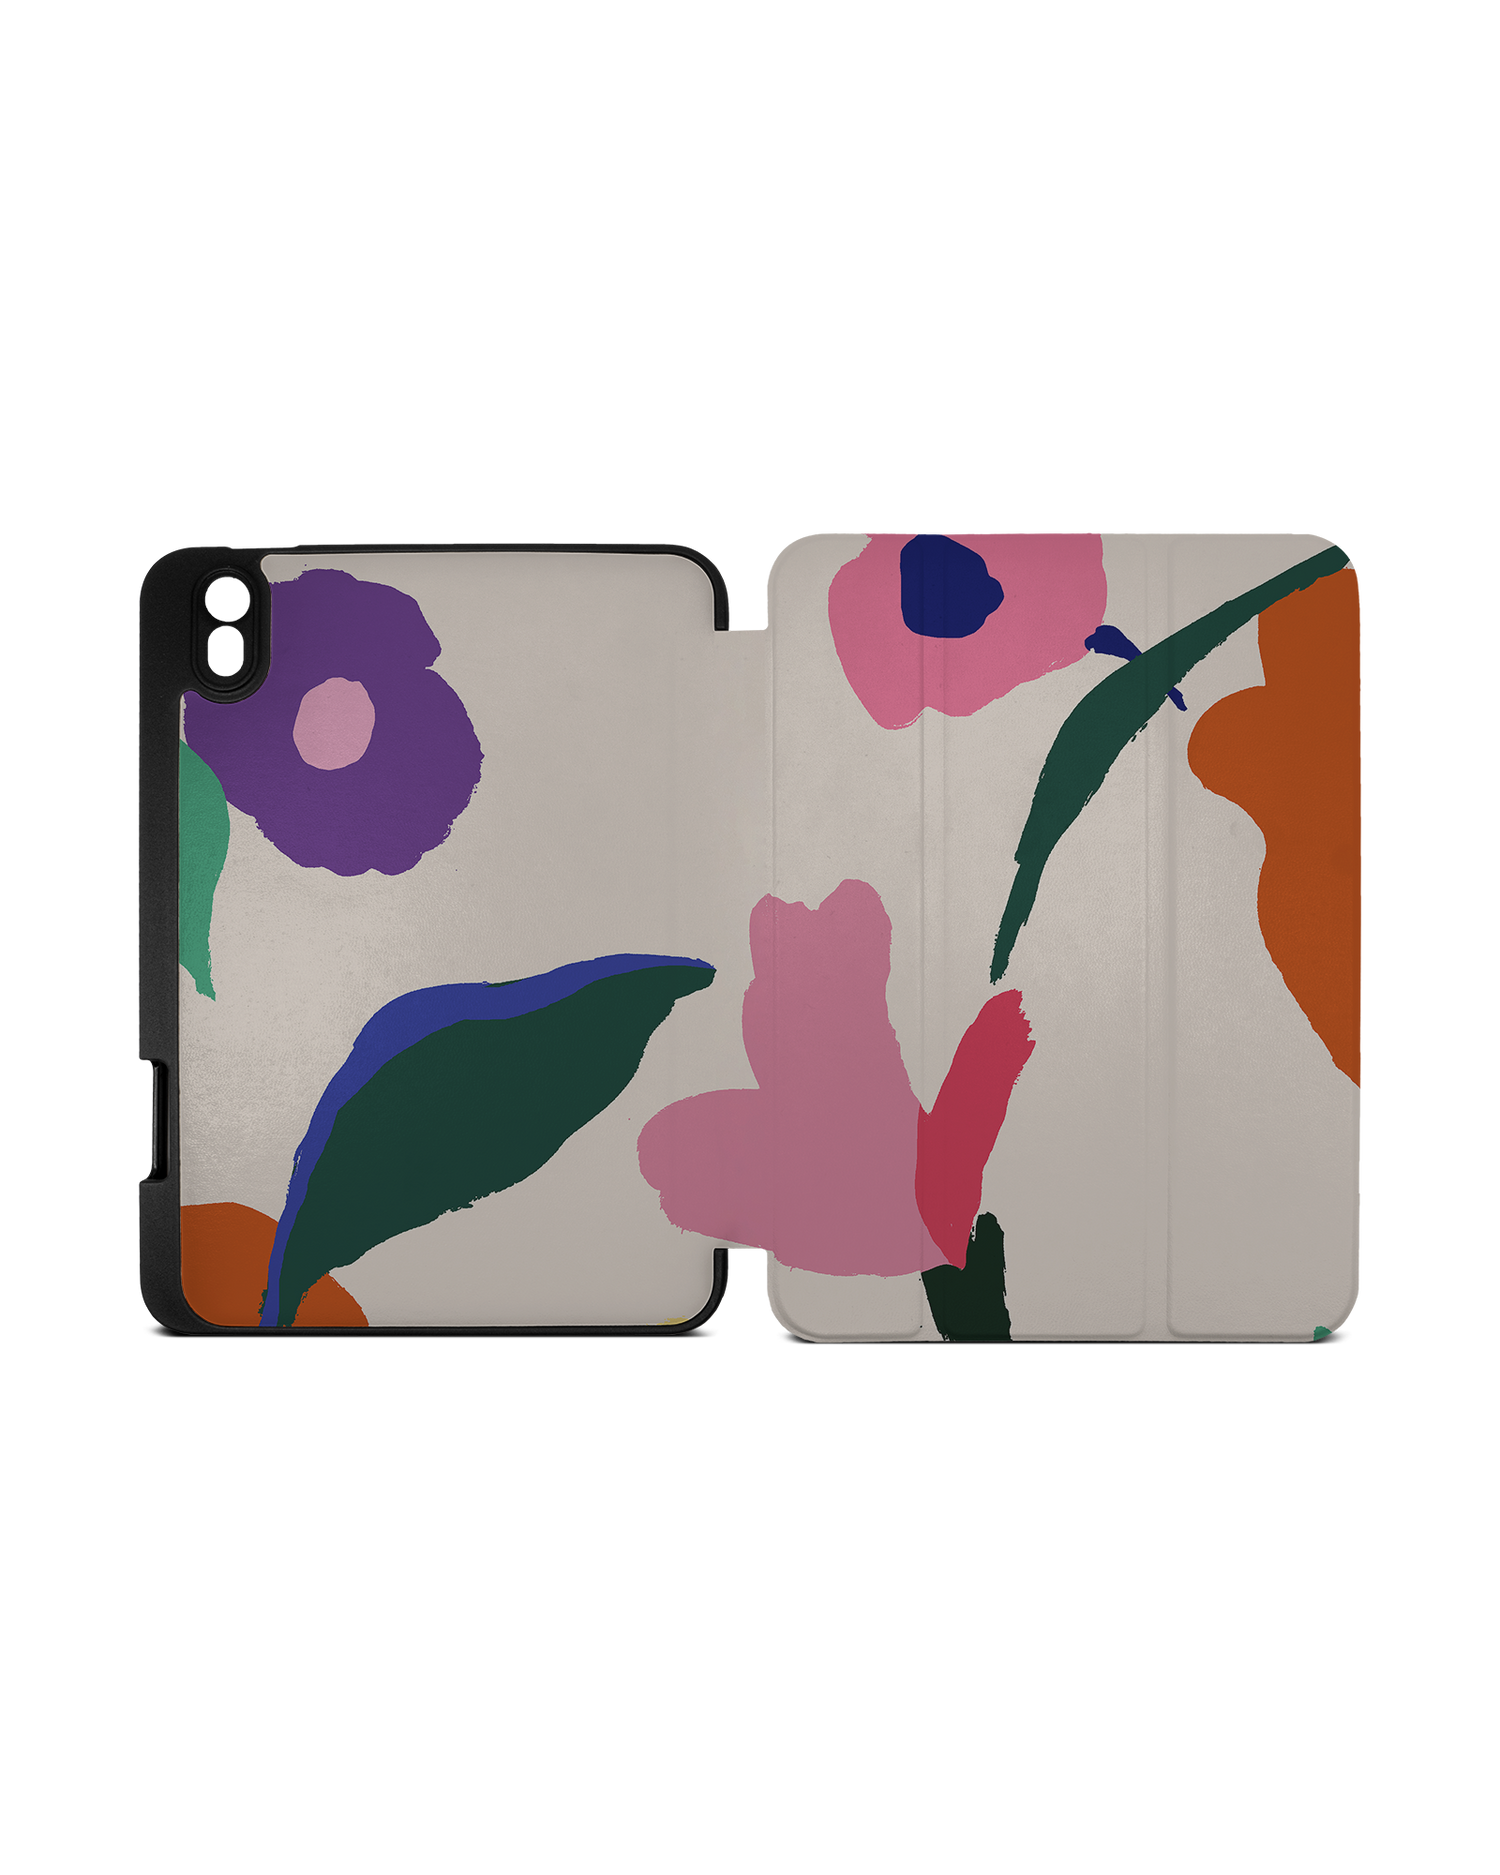 Handpainted Blooms iPad Case with Pencil Holder Apple iPad mini 6 (2021): Opened exterior view